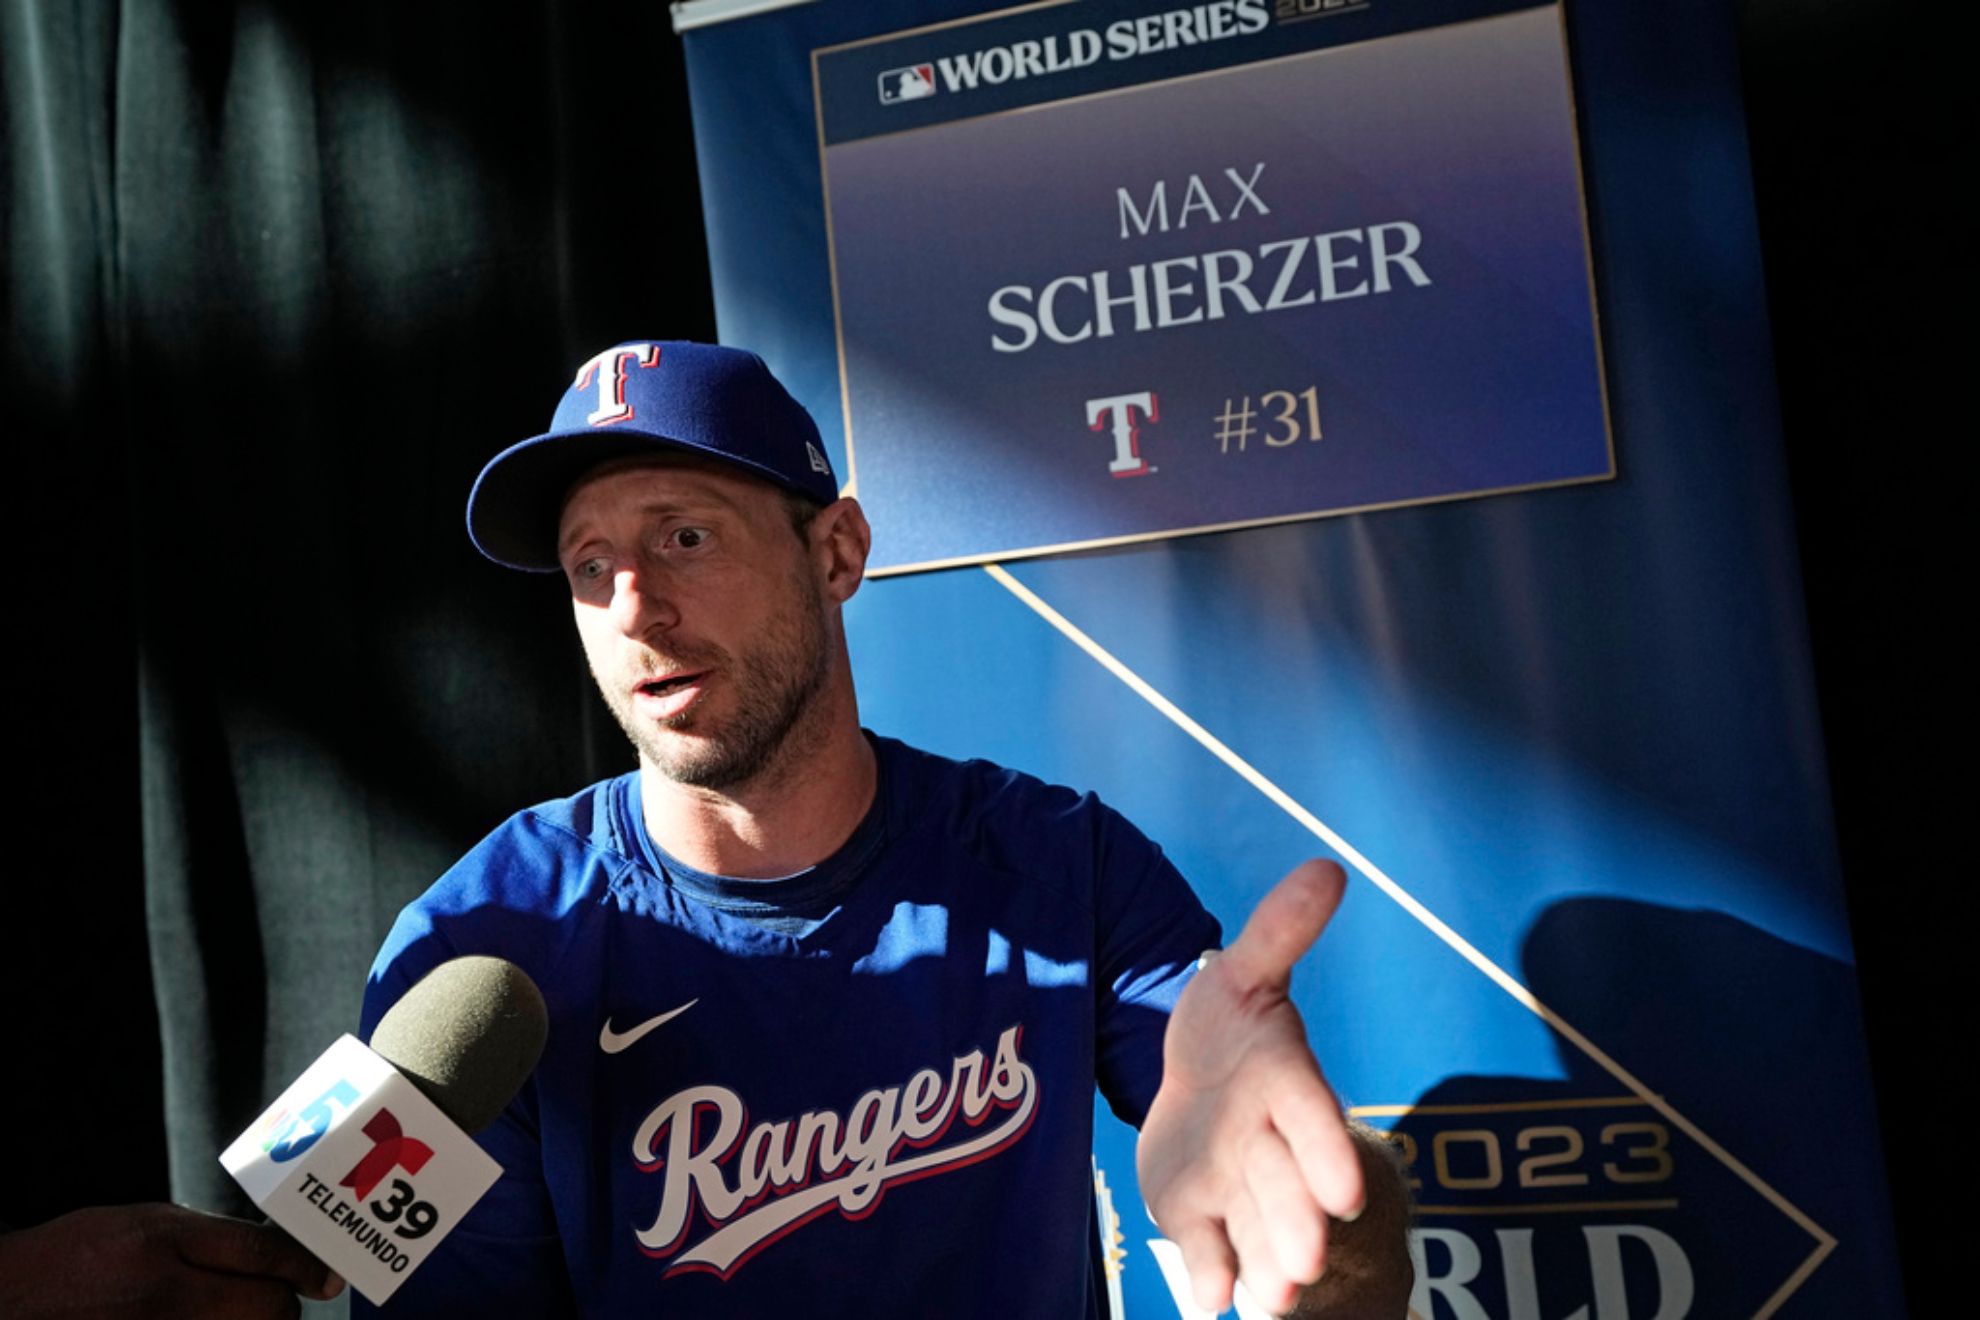 Max Scherzer gets brutally honest about the injury toll the pitch clock has on pitchers